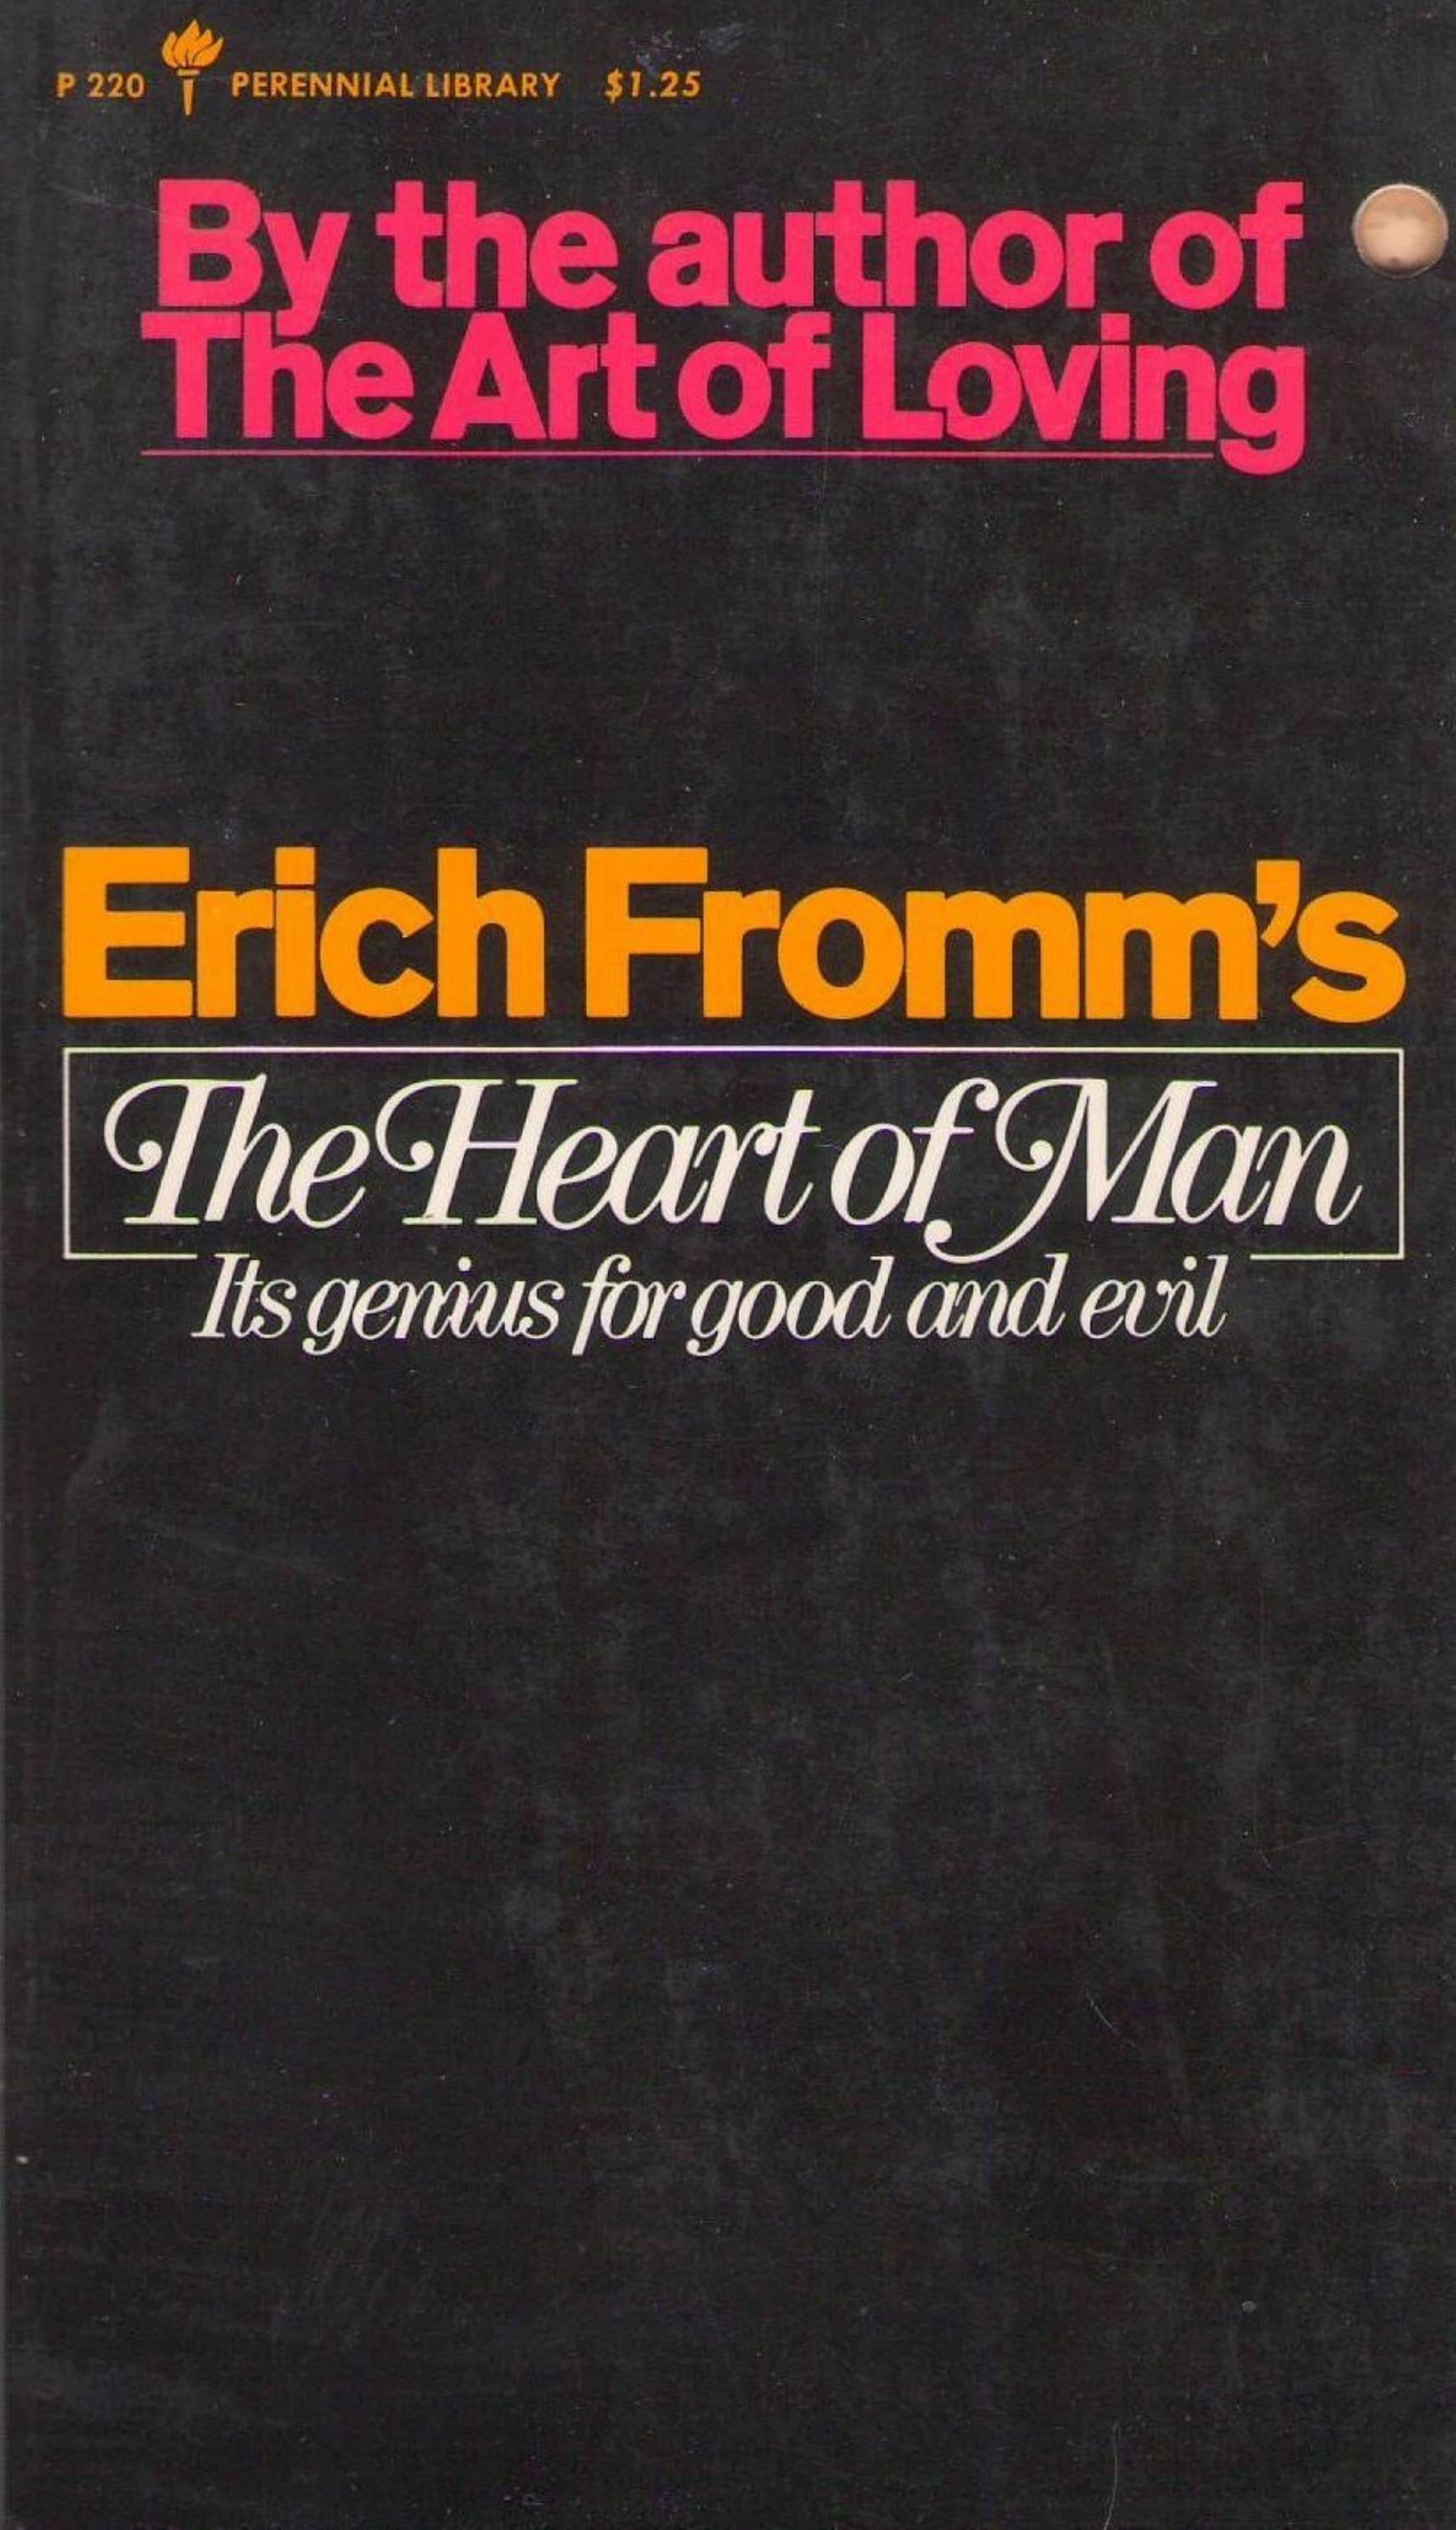 The Heart of Man by Erich Fromm